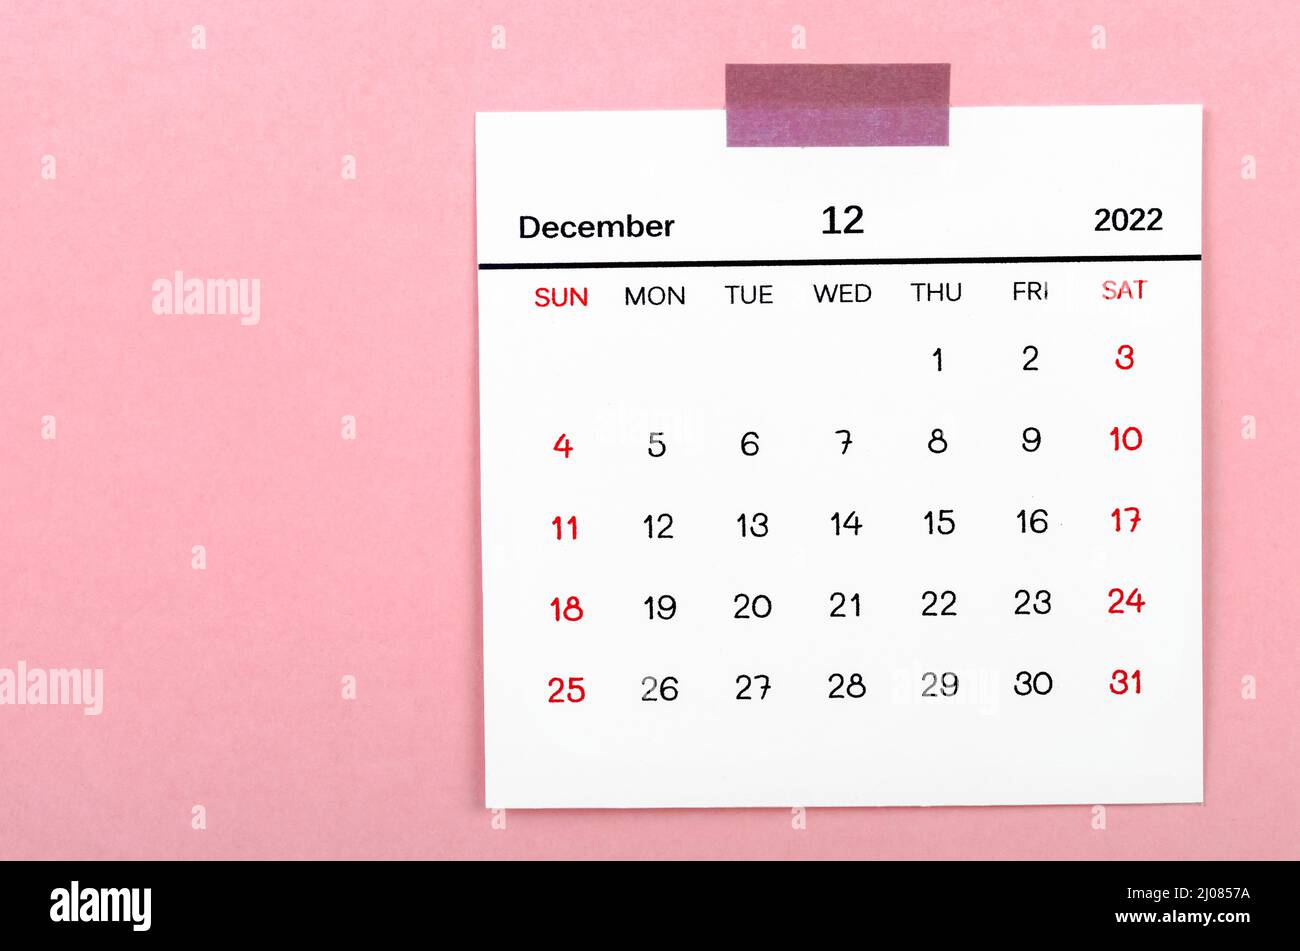 The December 2022 calendar on pink background. Stock Photo